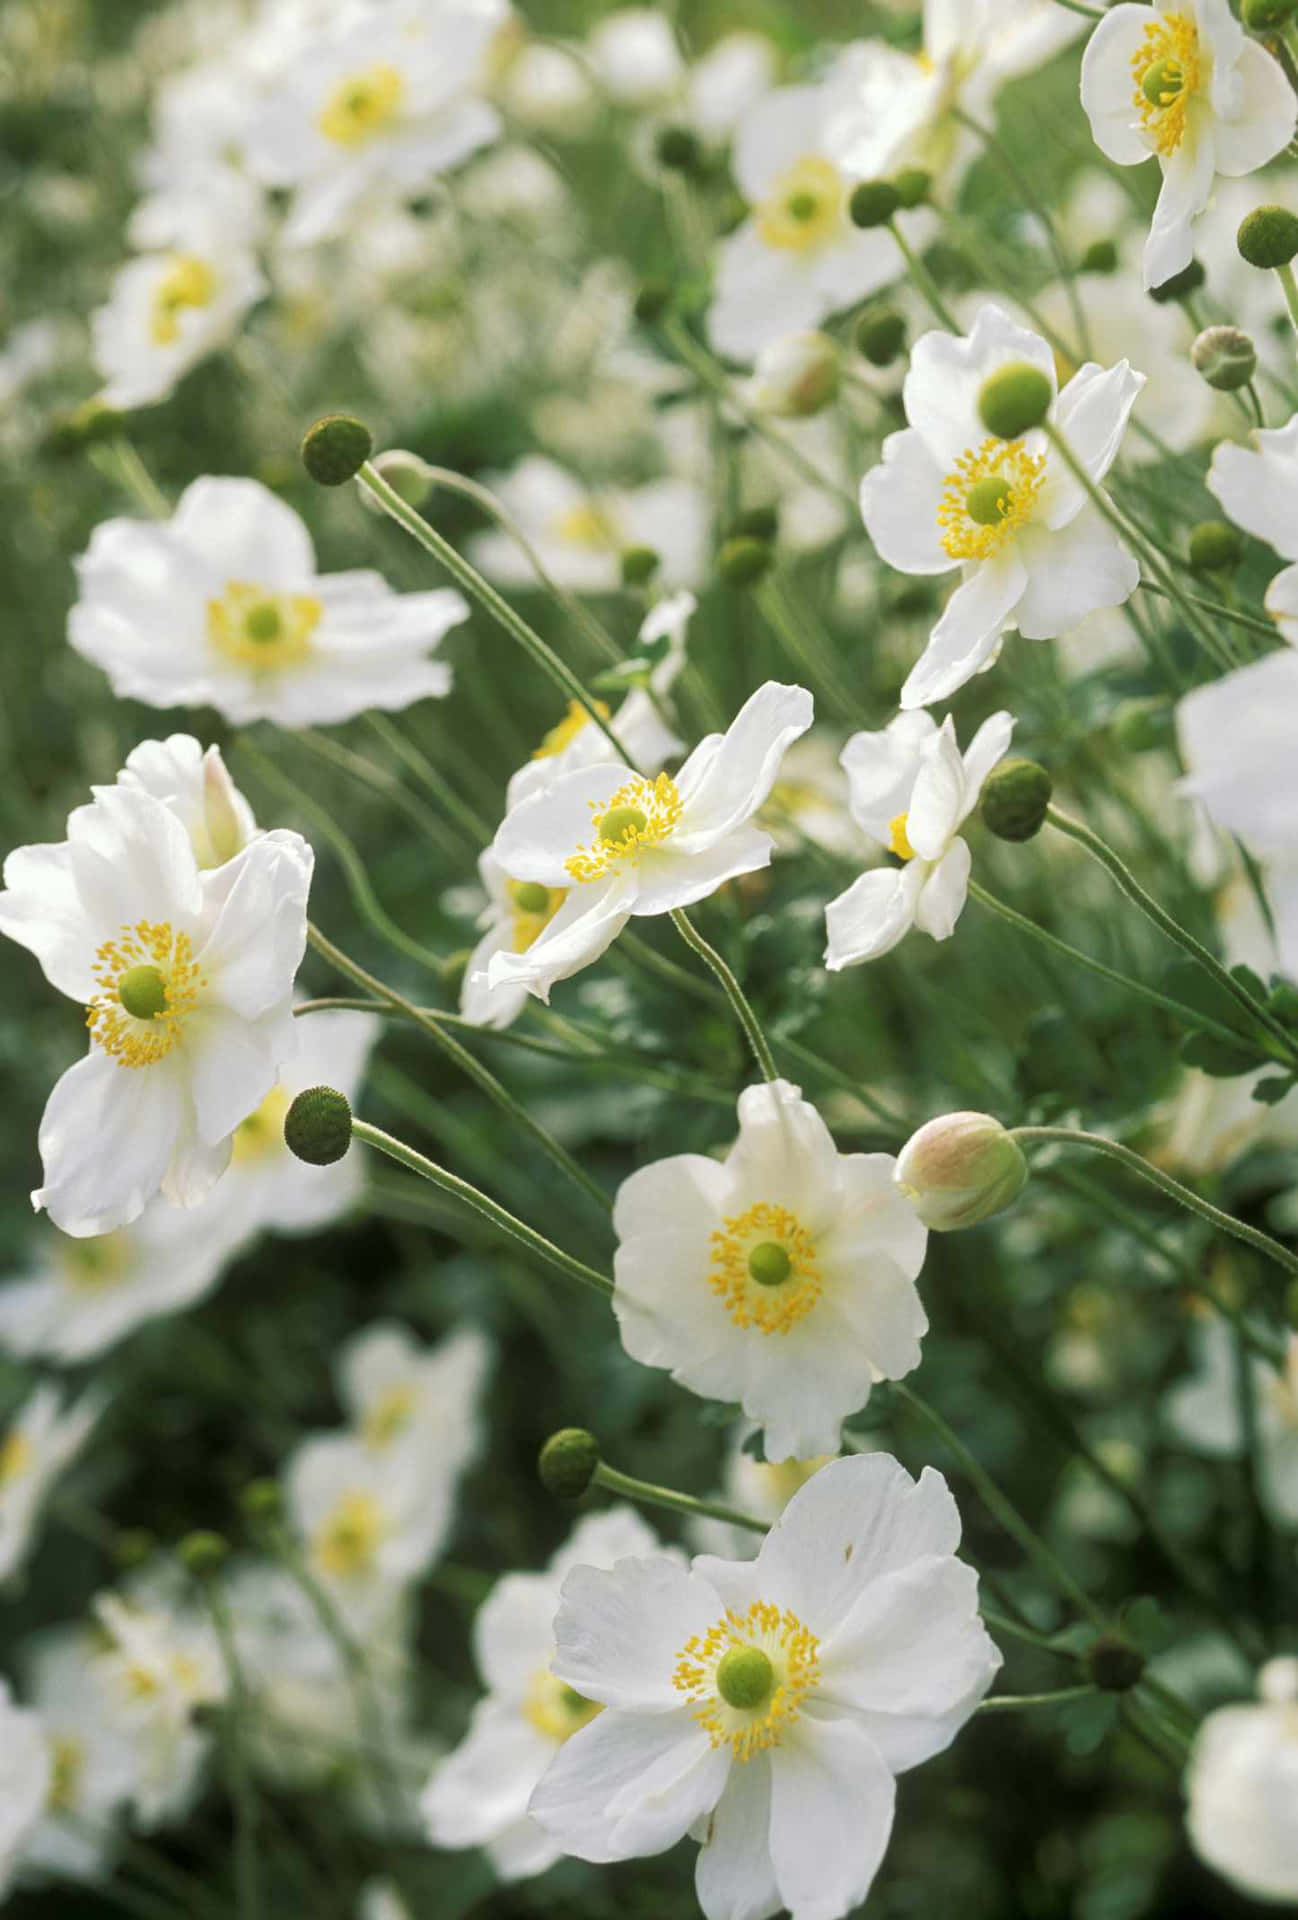 White Flowers With Yellow Centers In A Field